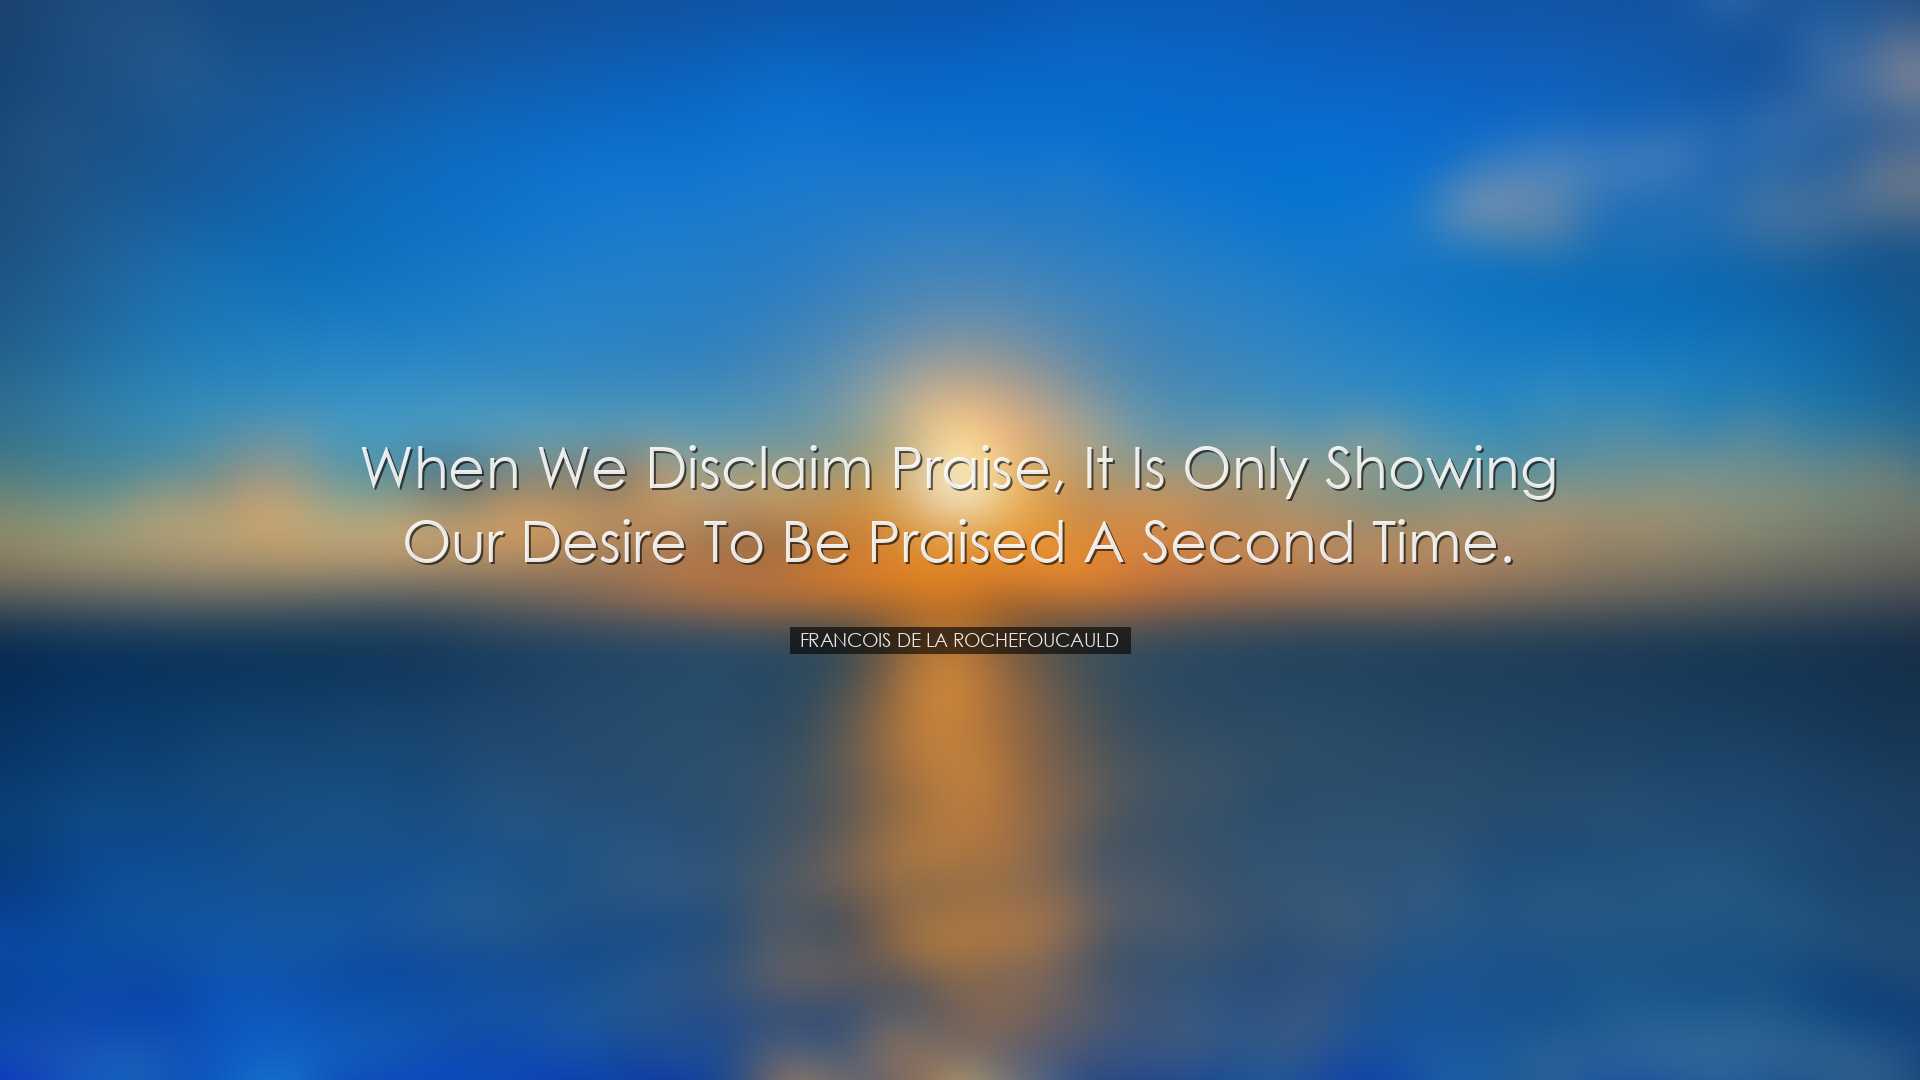 When we disclaim praise, it is only showing our desire to be prais